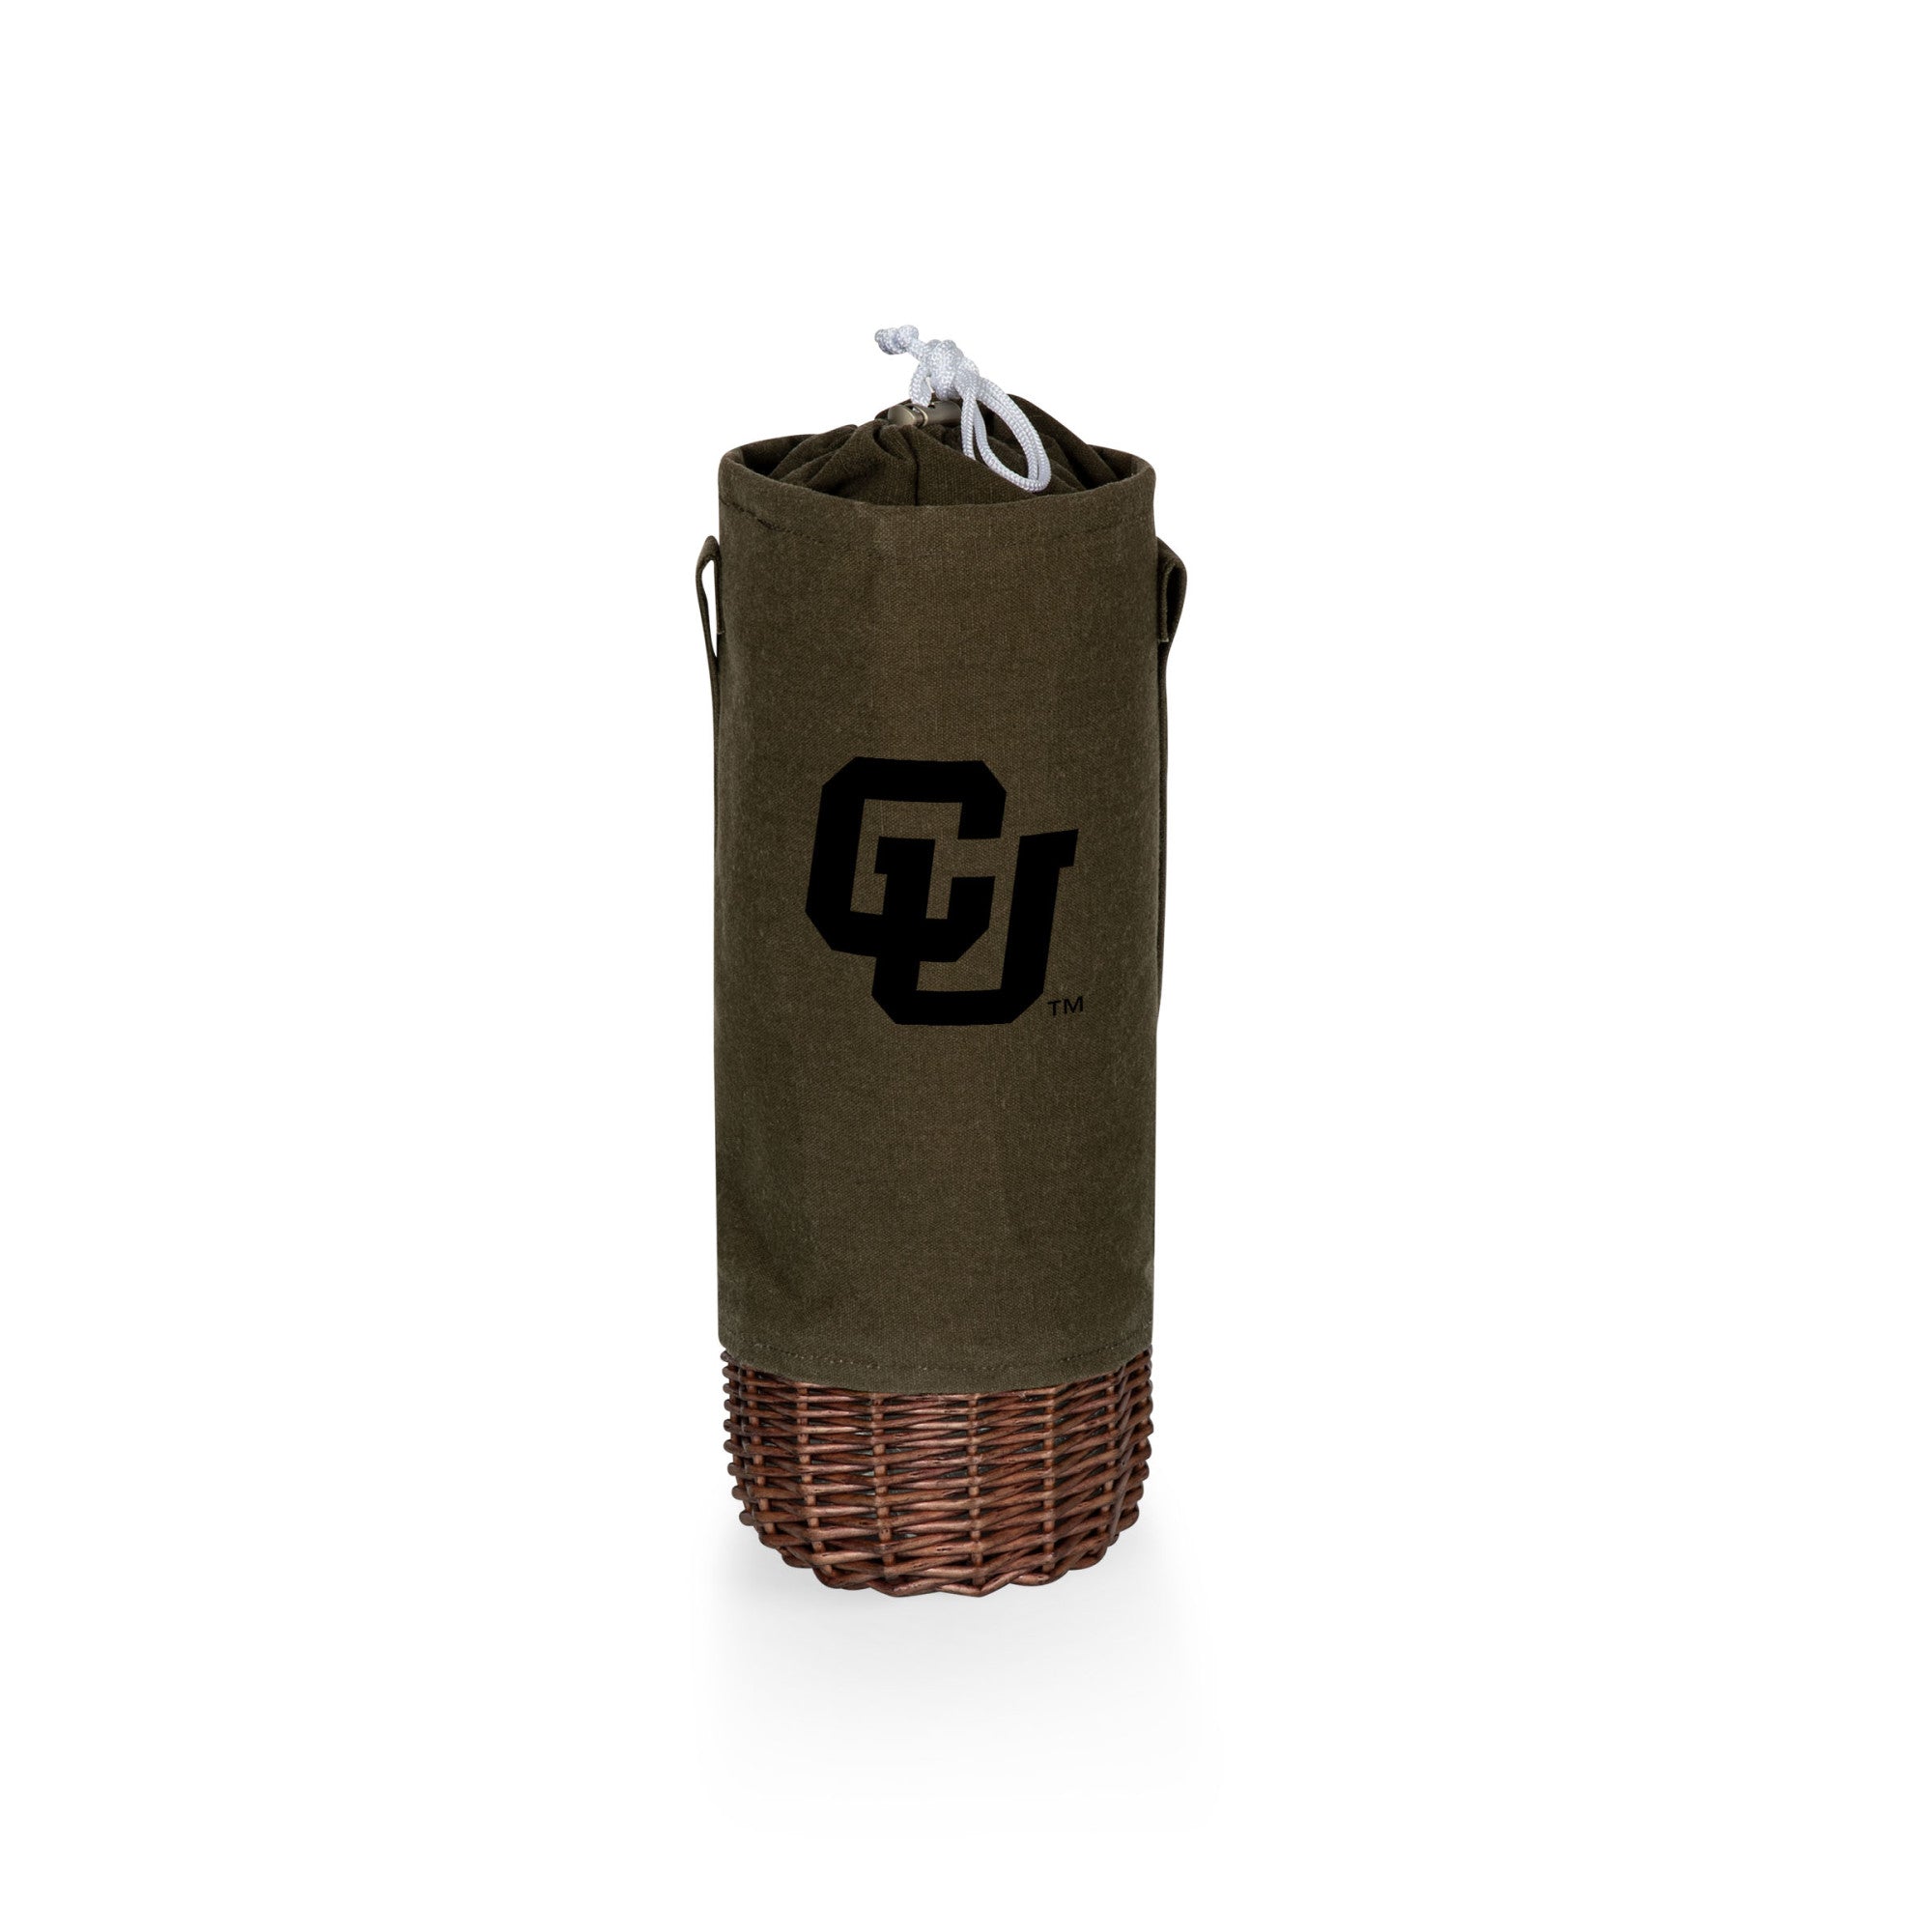 Colorado Buffaloes - Malbec Insulated Canvas and Willow Wine Bottle Basket